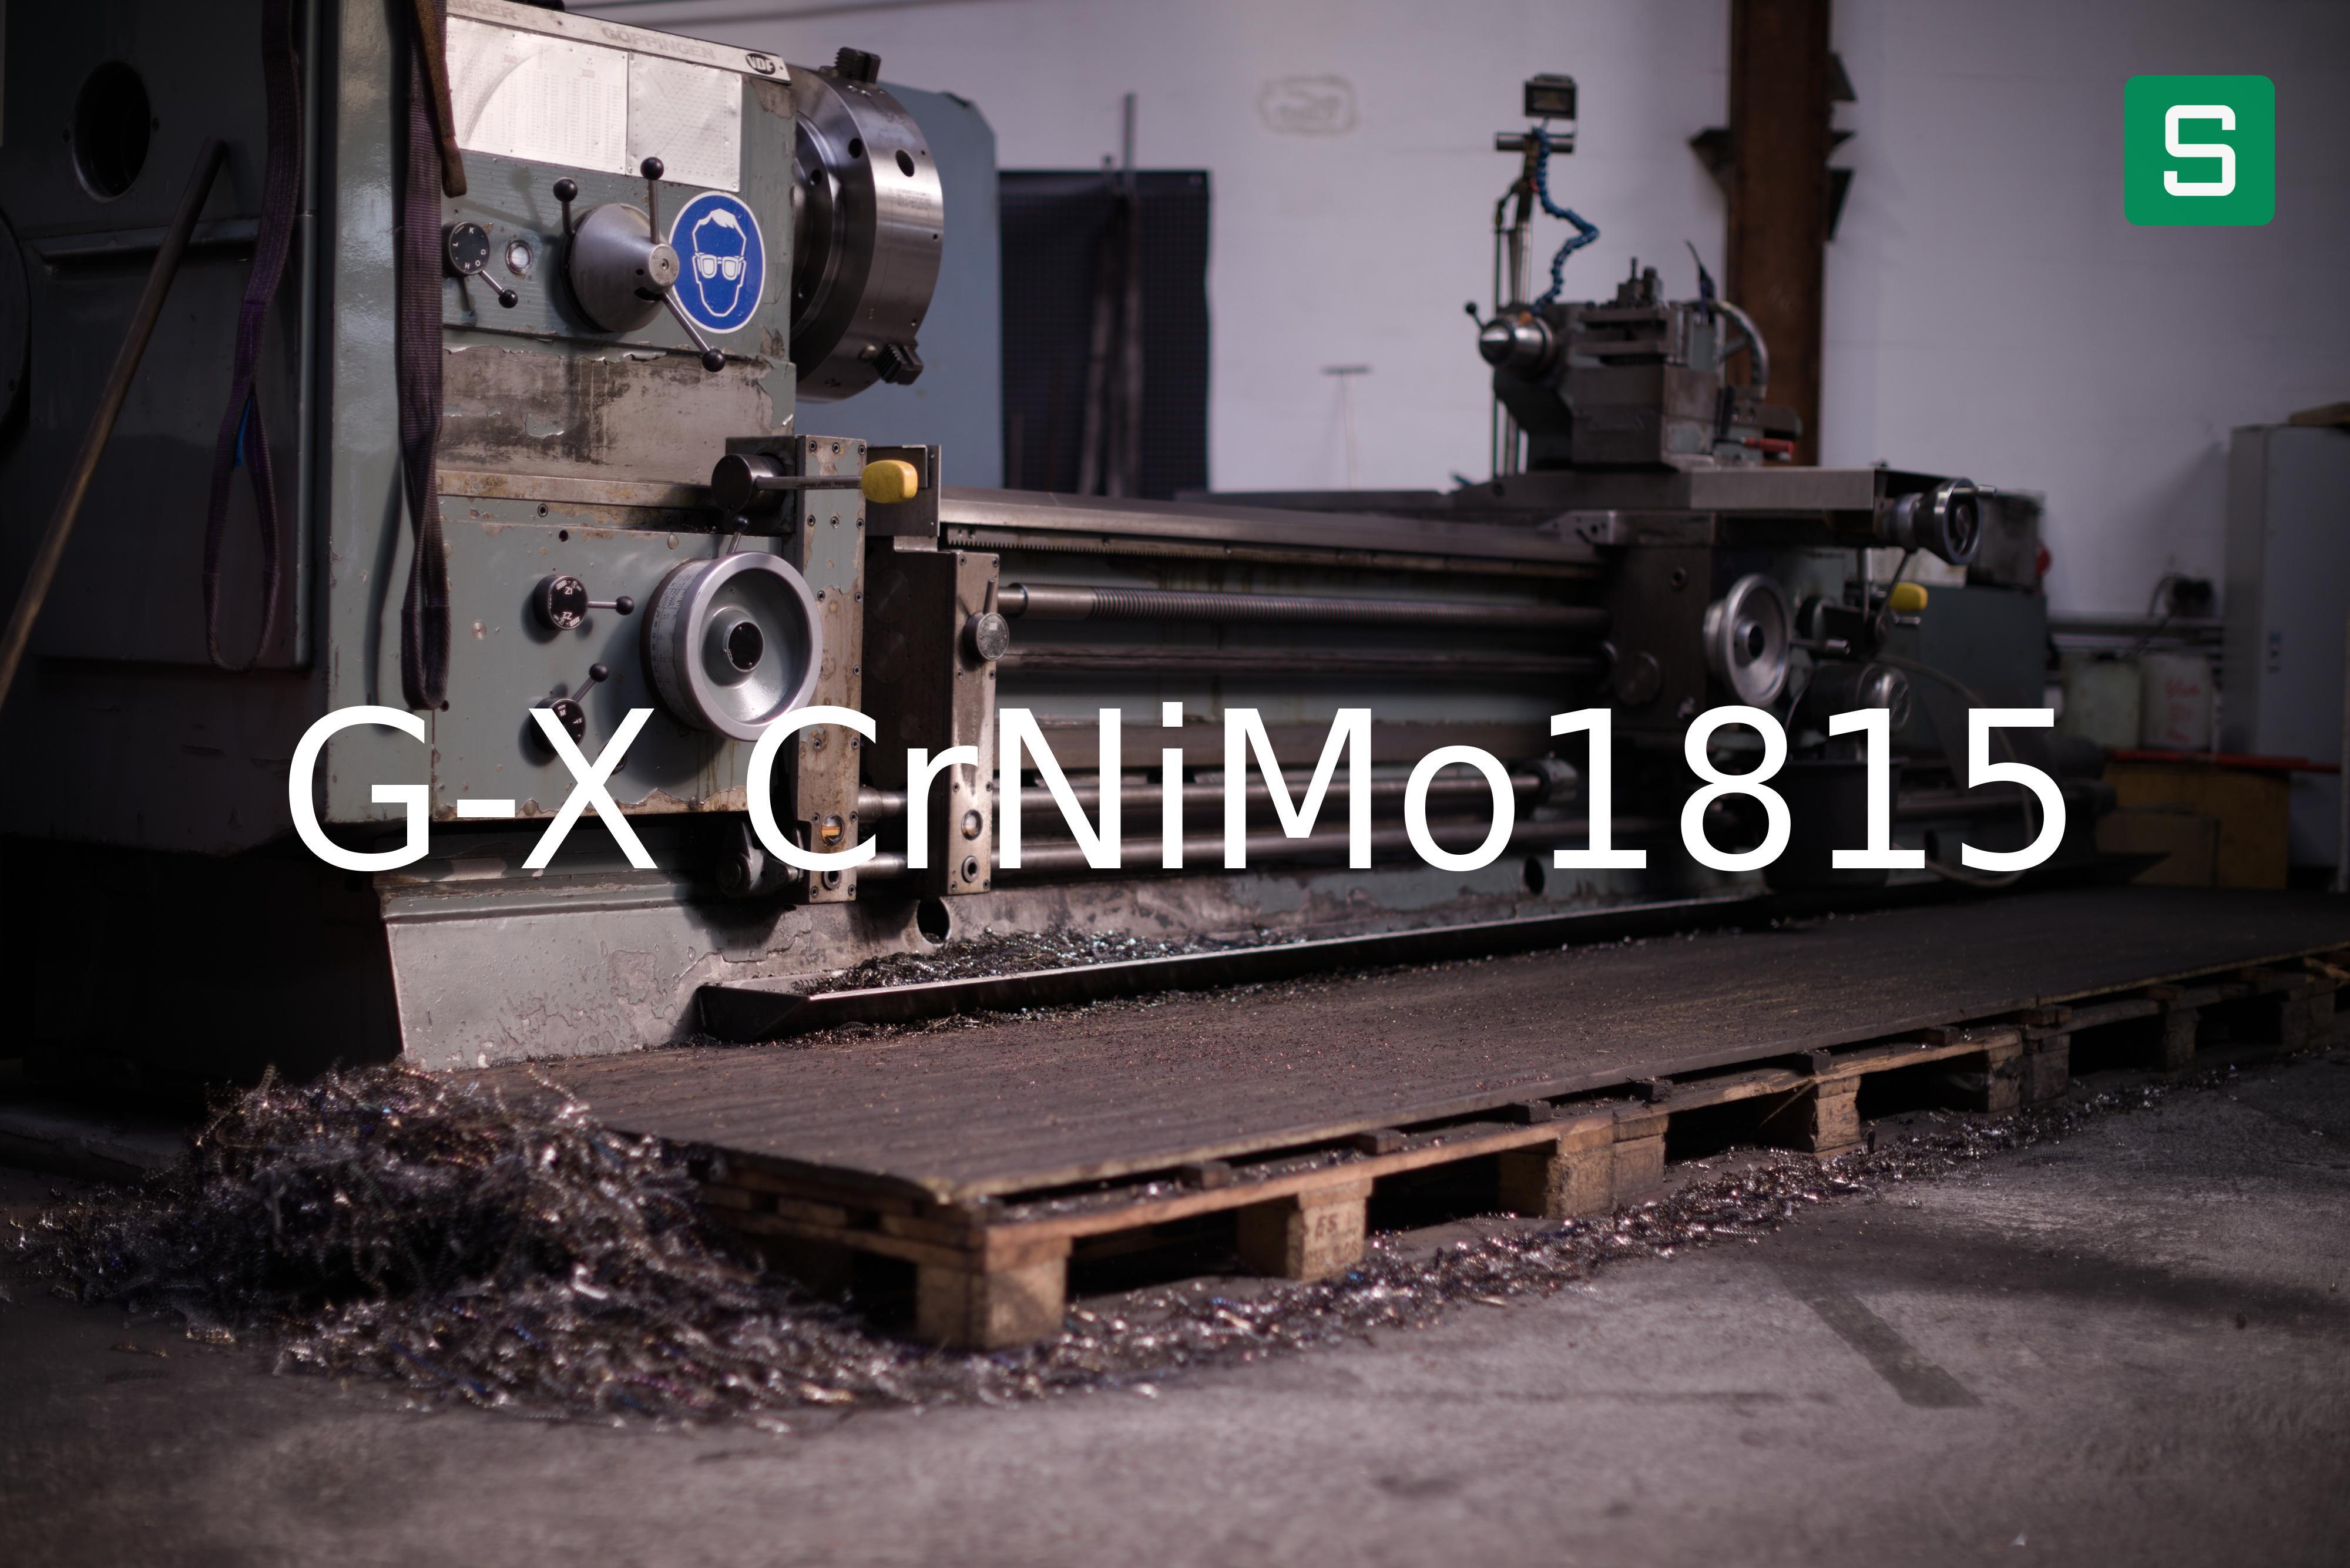 Steel Material: G-X CrNiMo1815